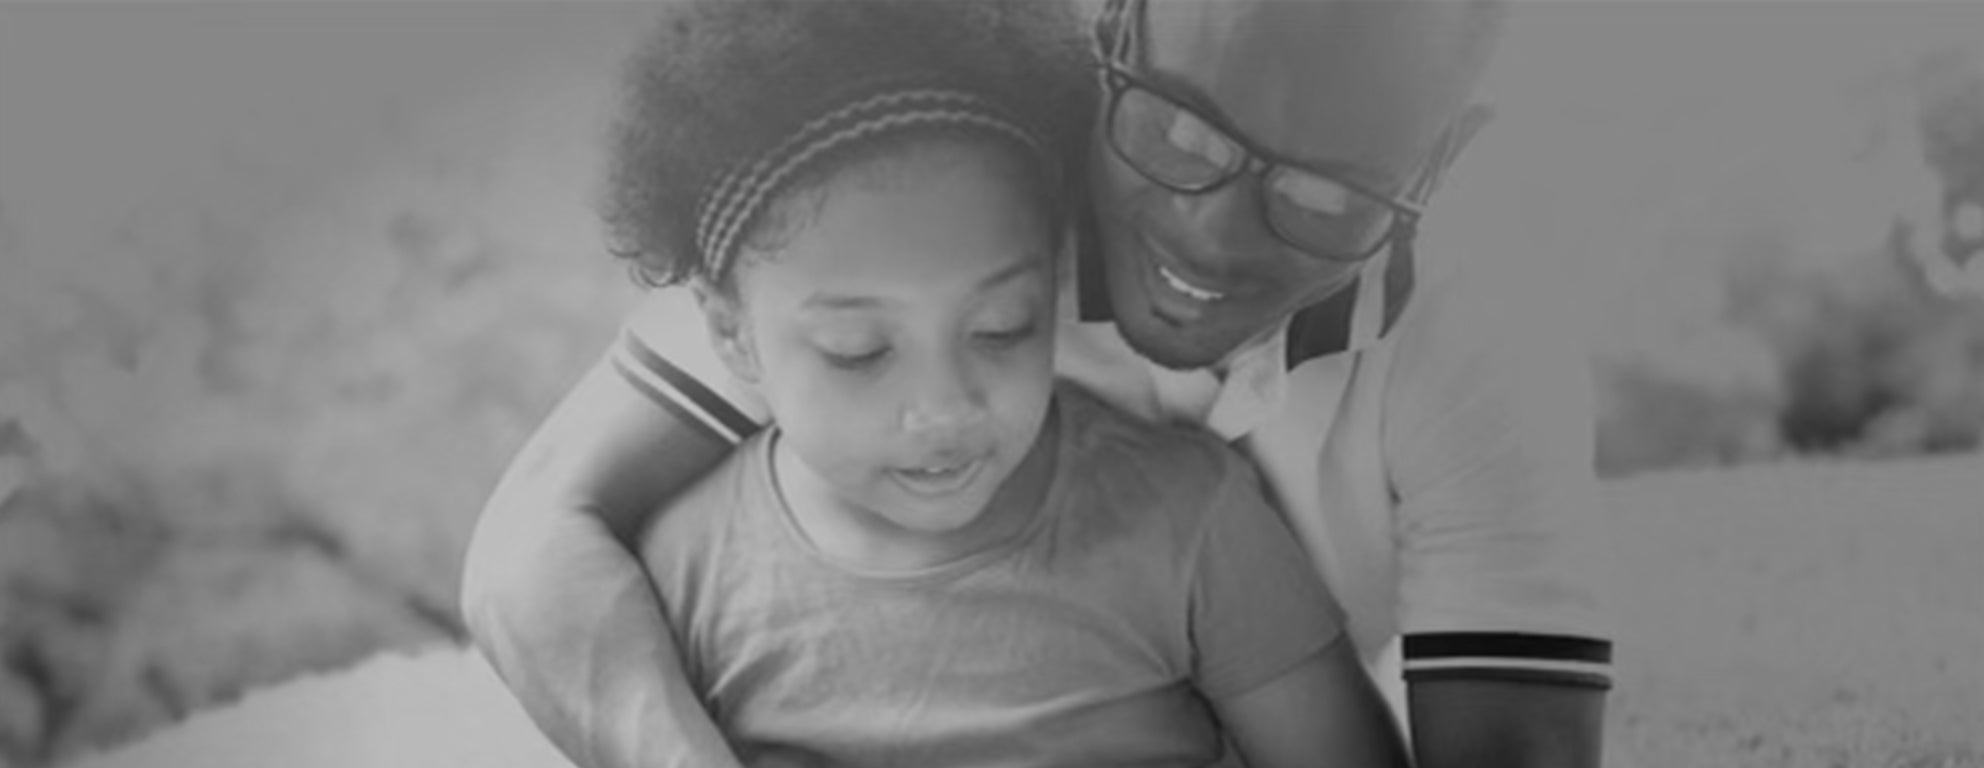 Black and white photo of a Black father and daughter hugging and smiling together